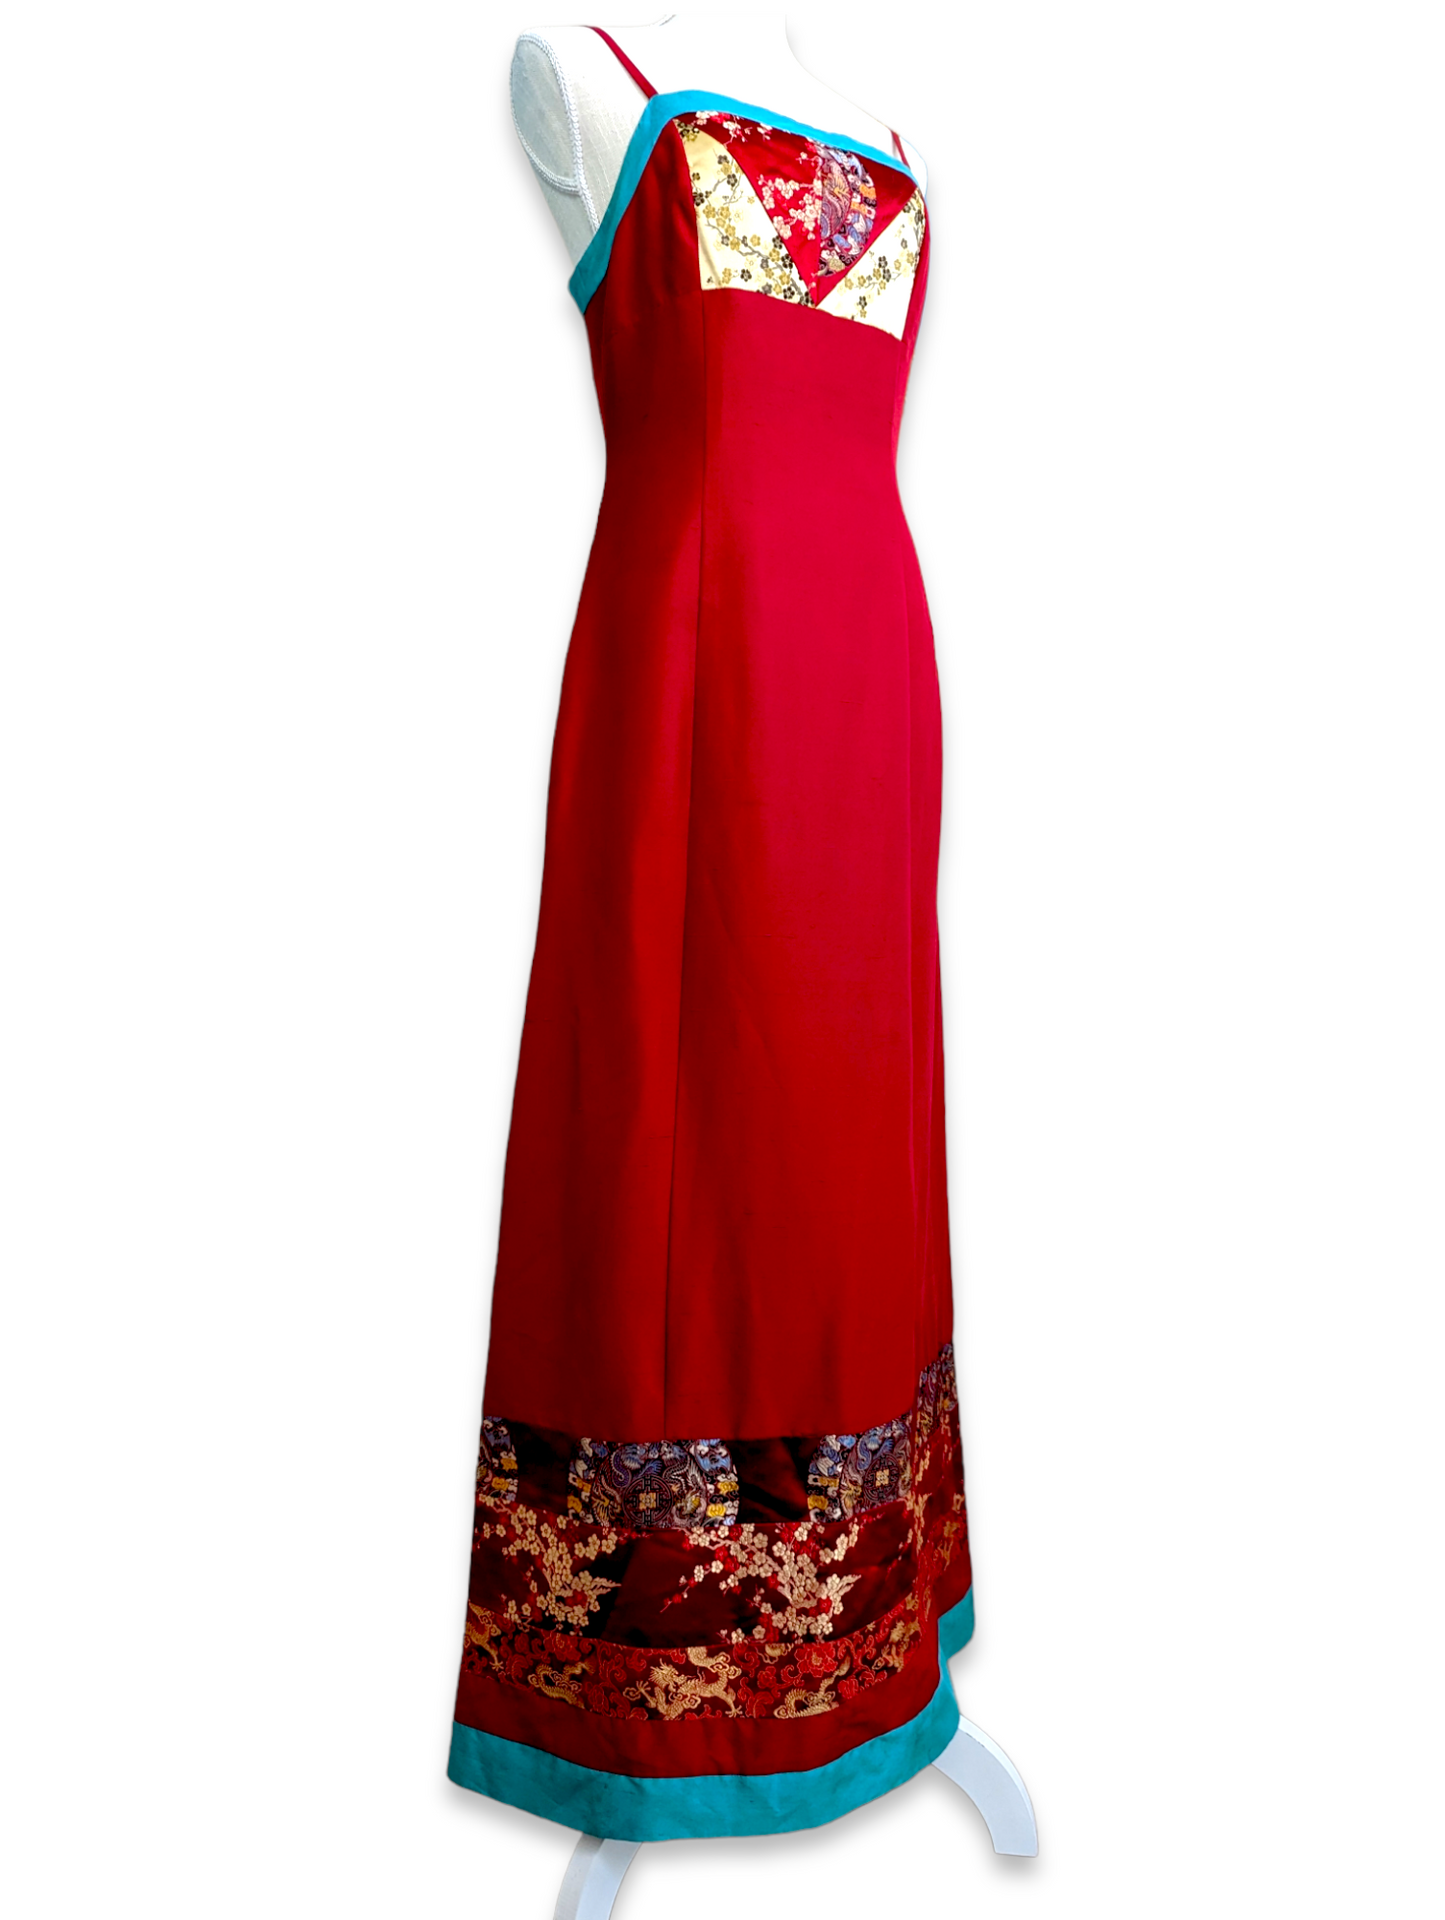 1990s Sue Wong Shantung Silk Spaghetti Strap Shift Y2K Dress In Red, Blue and Gold